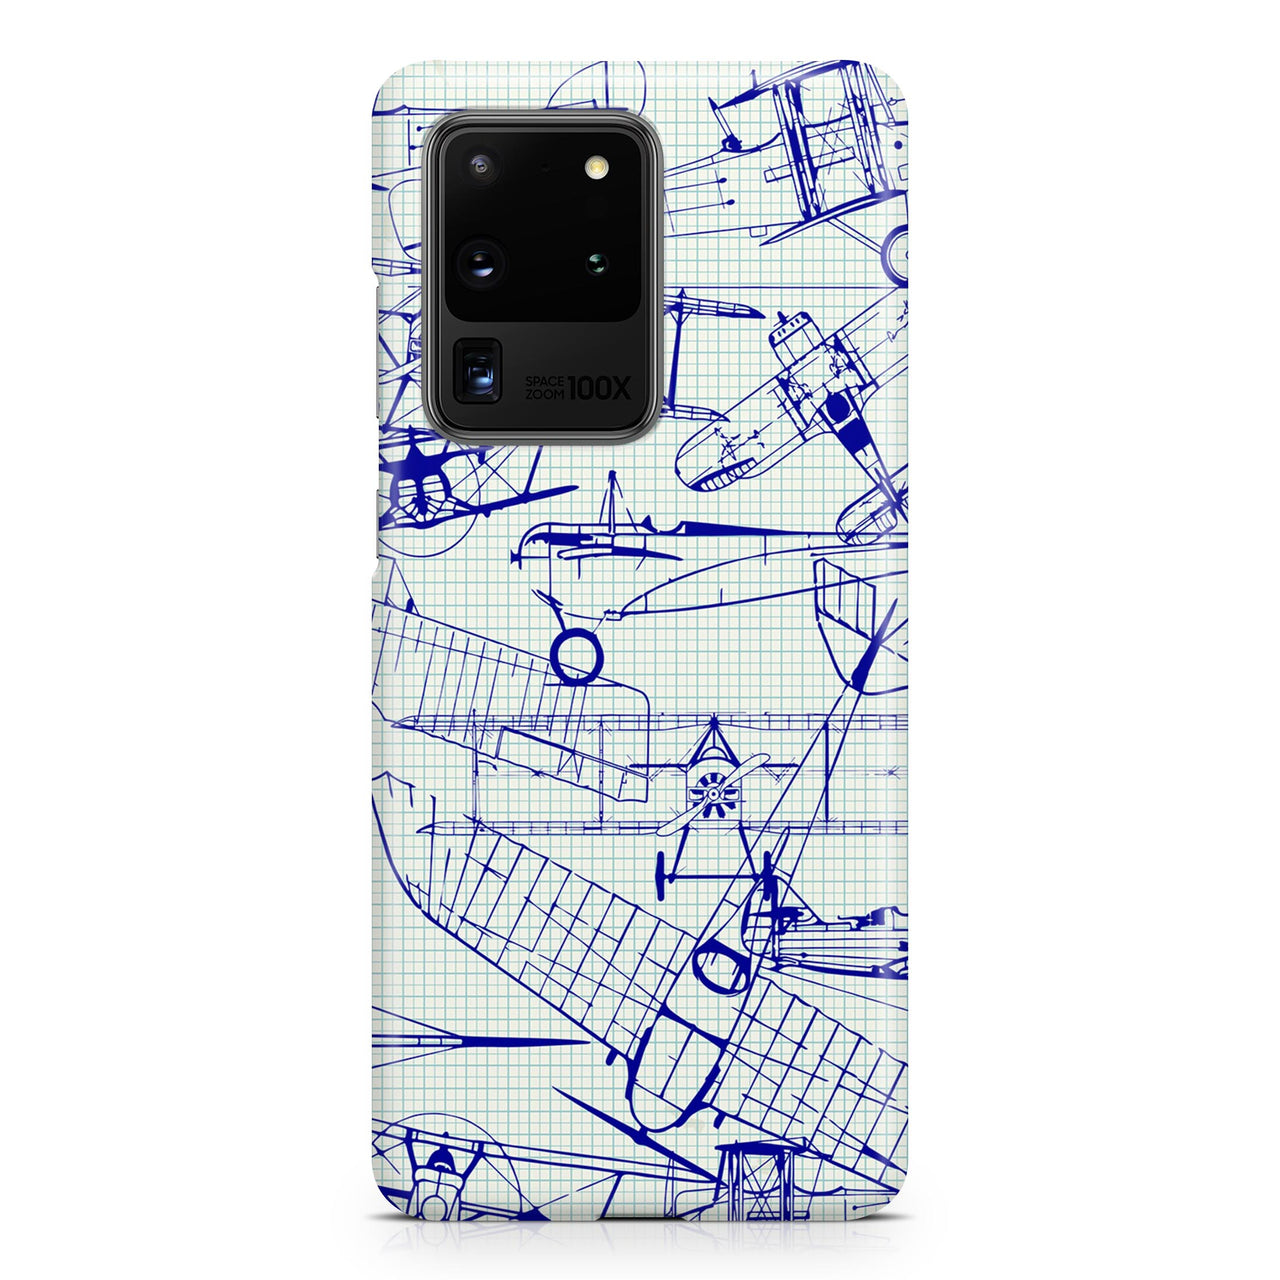 Amazing Drawings of Old Aircrafts Samsung S & Note Cases